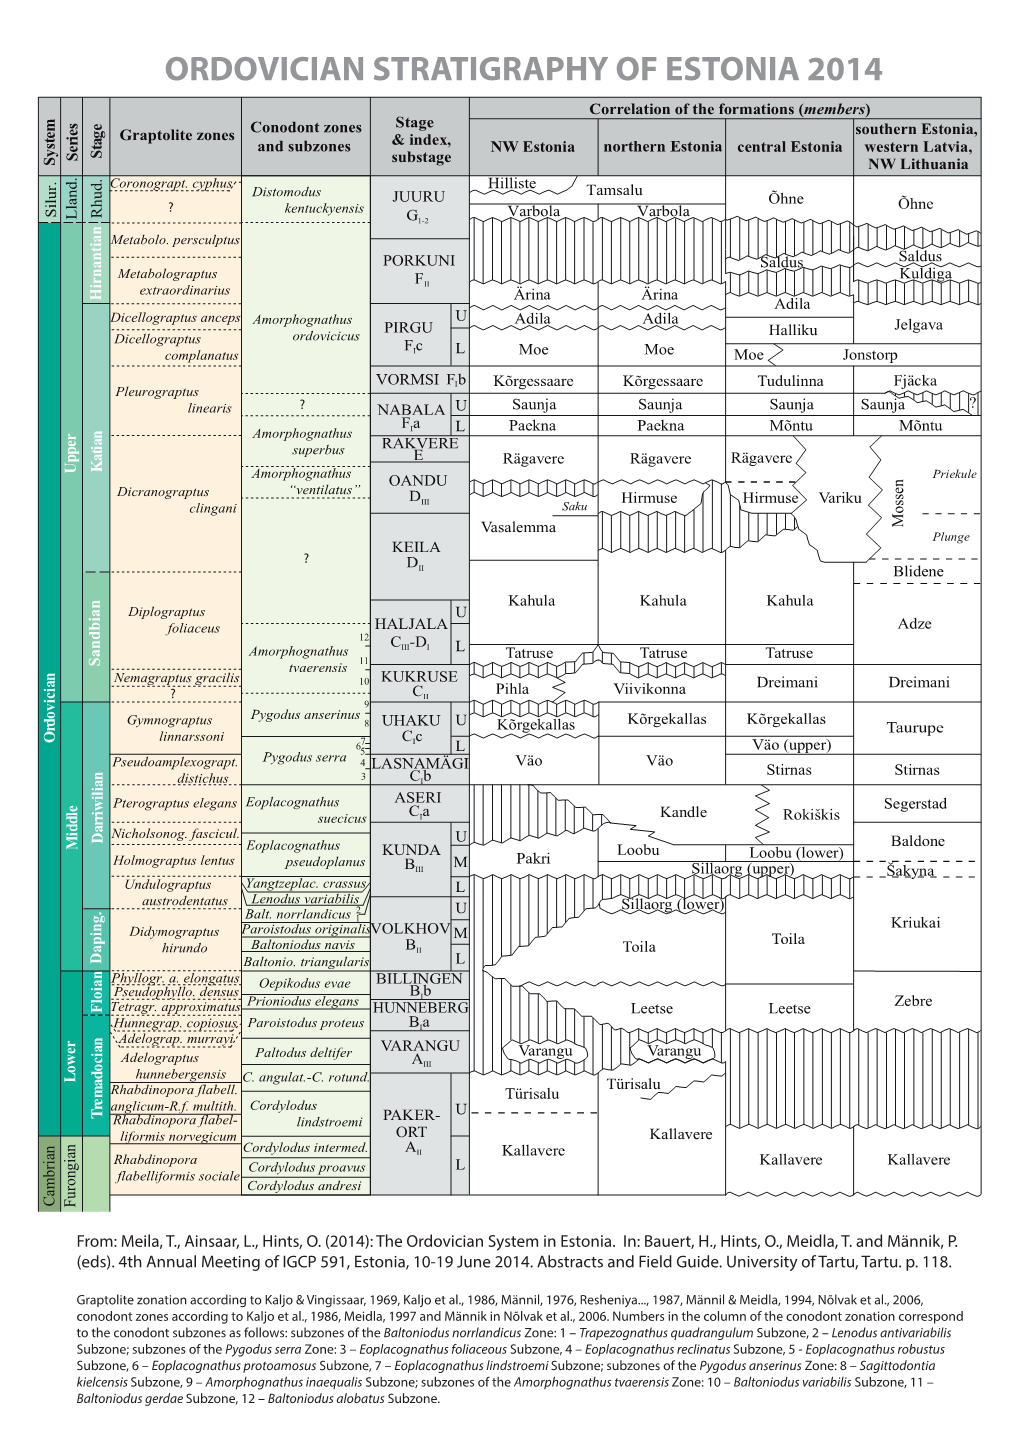 ORDOVICIAN STRATIGRAPHY of ESTONIA 2014 Correlation of the Formations (Members) S E M Stage